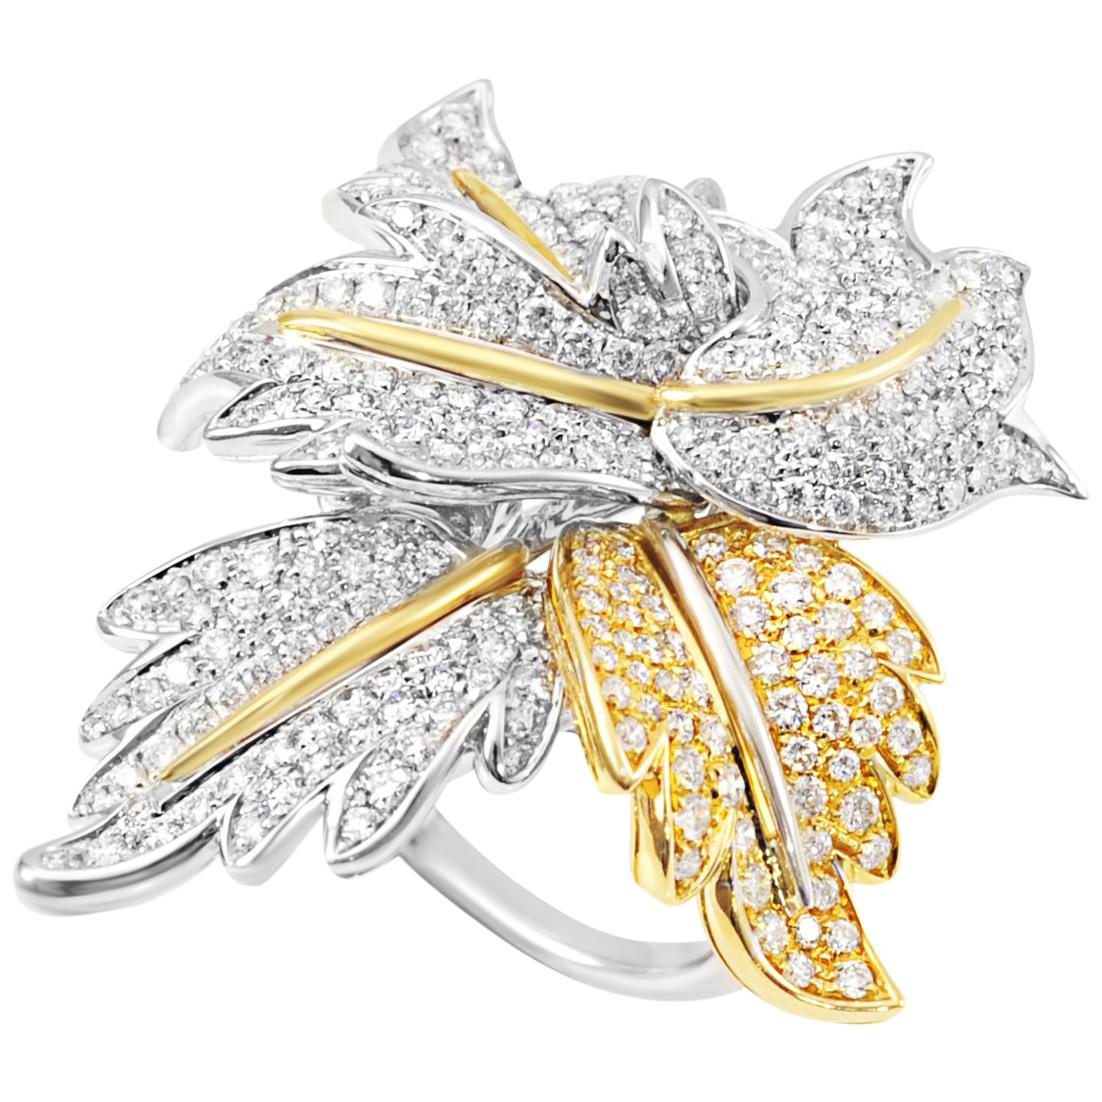 Picchiotti 18 Karat White and Yellow Round Diamond Cocktail Ring For Sale